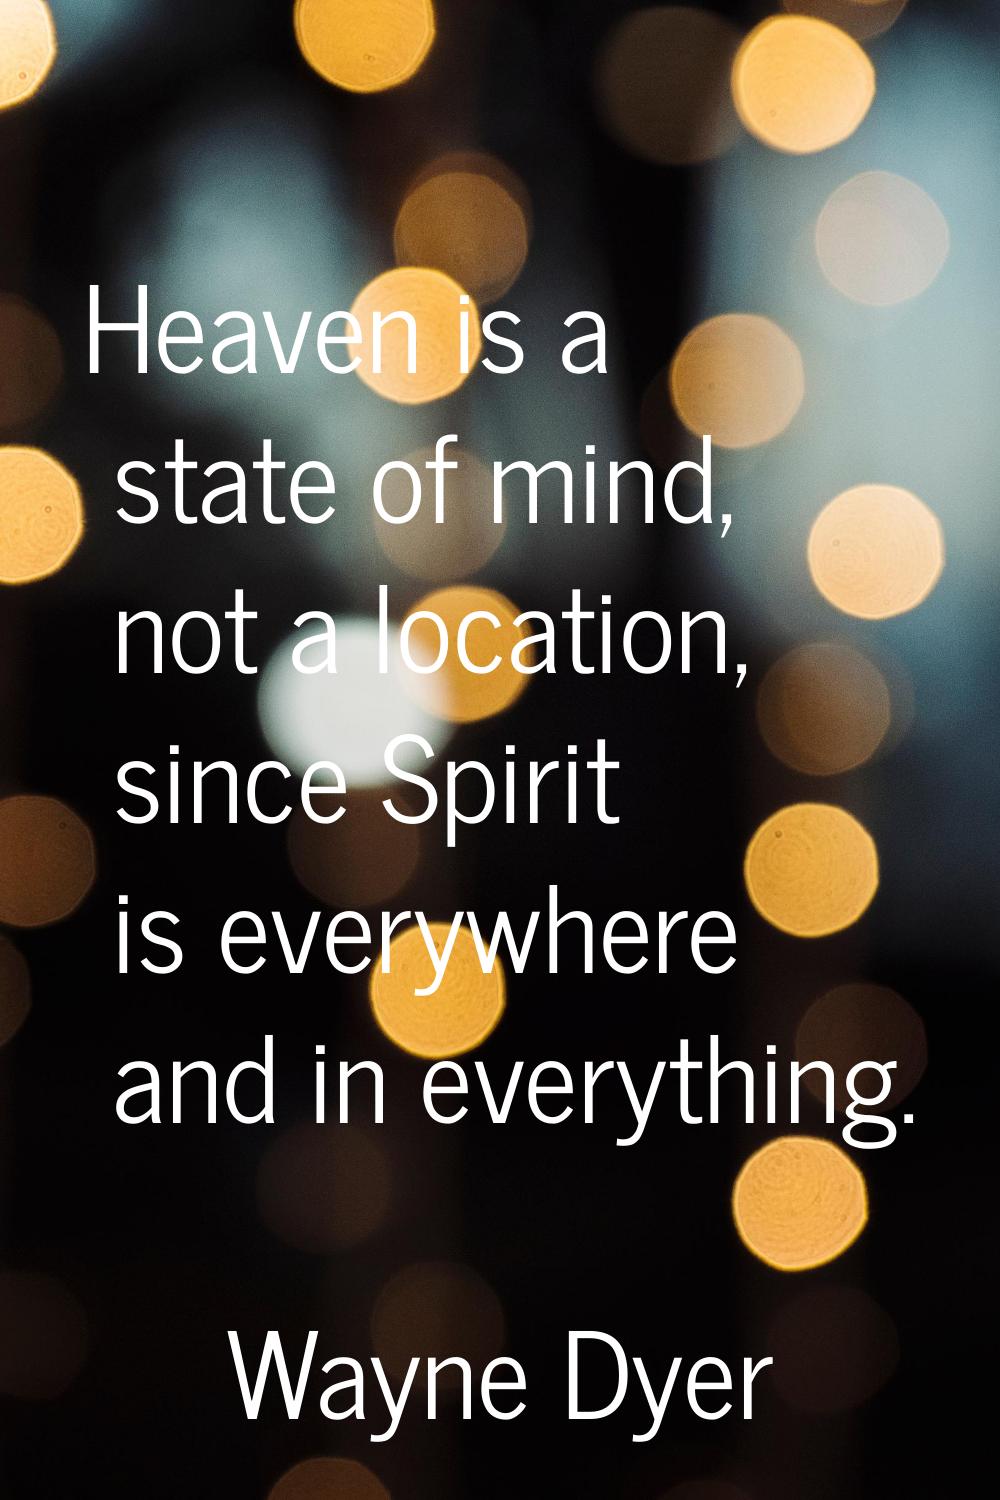 Heaven is a state of mind, not a location, since Spirit is everywhere and in everything.